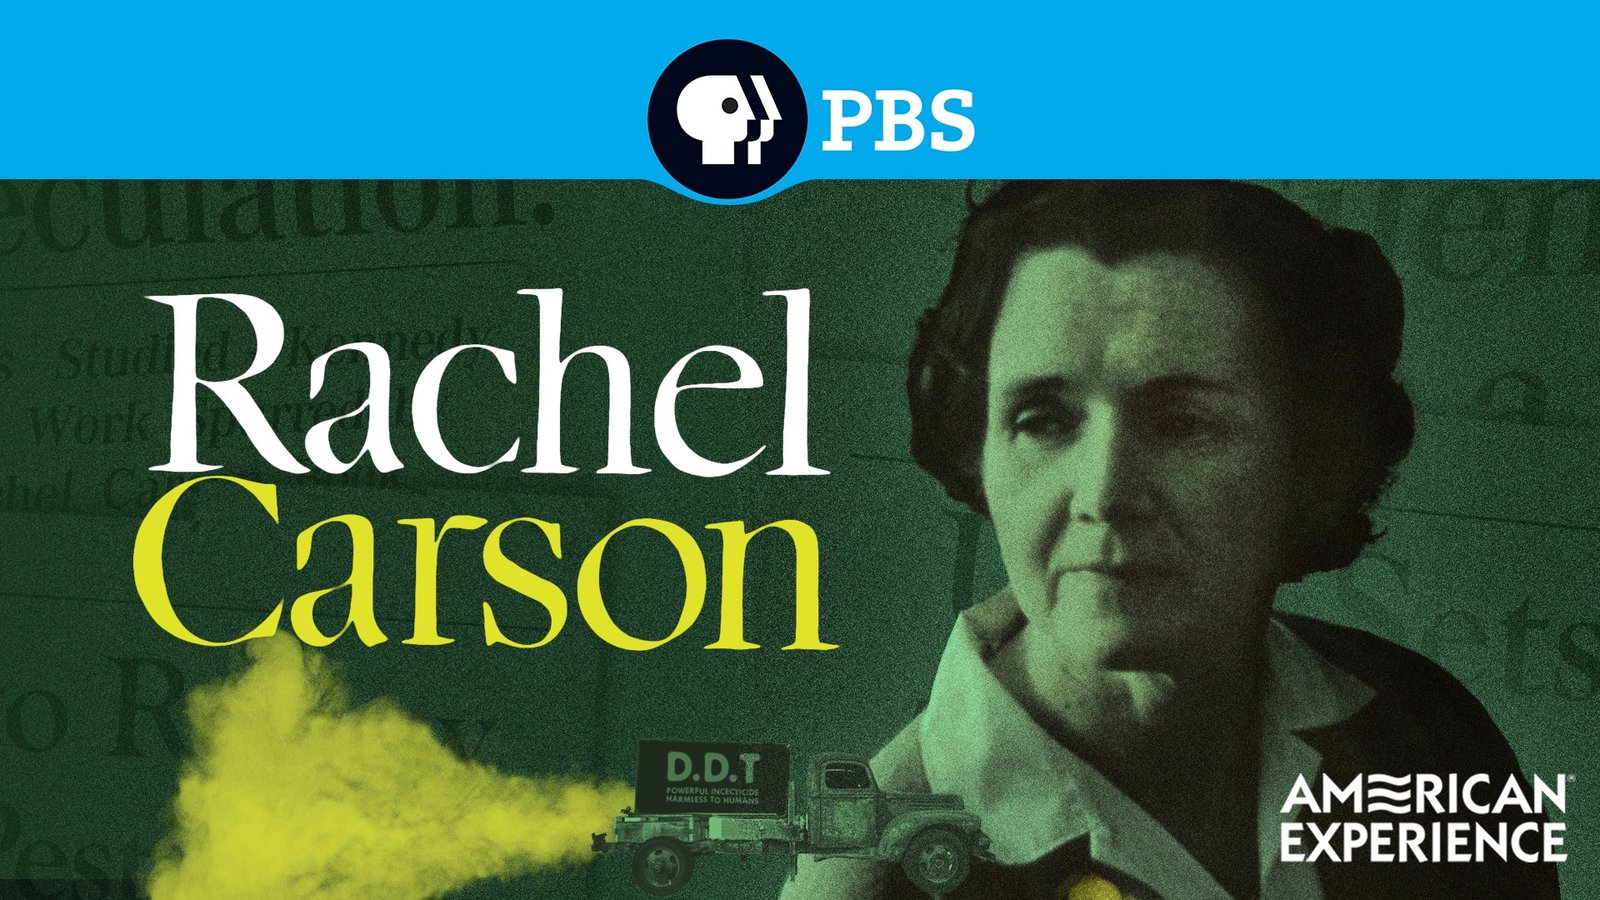 Rachel Carson - The Woman Who Launched the Modern Environmental Movement